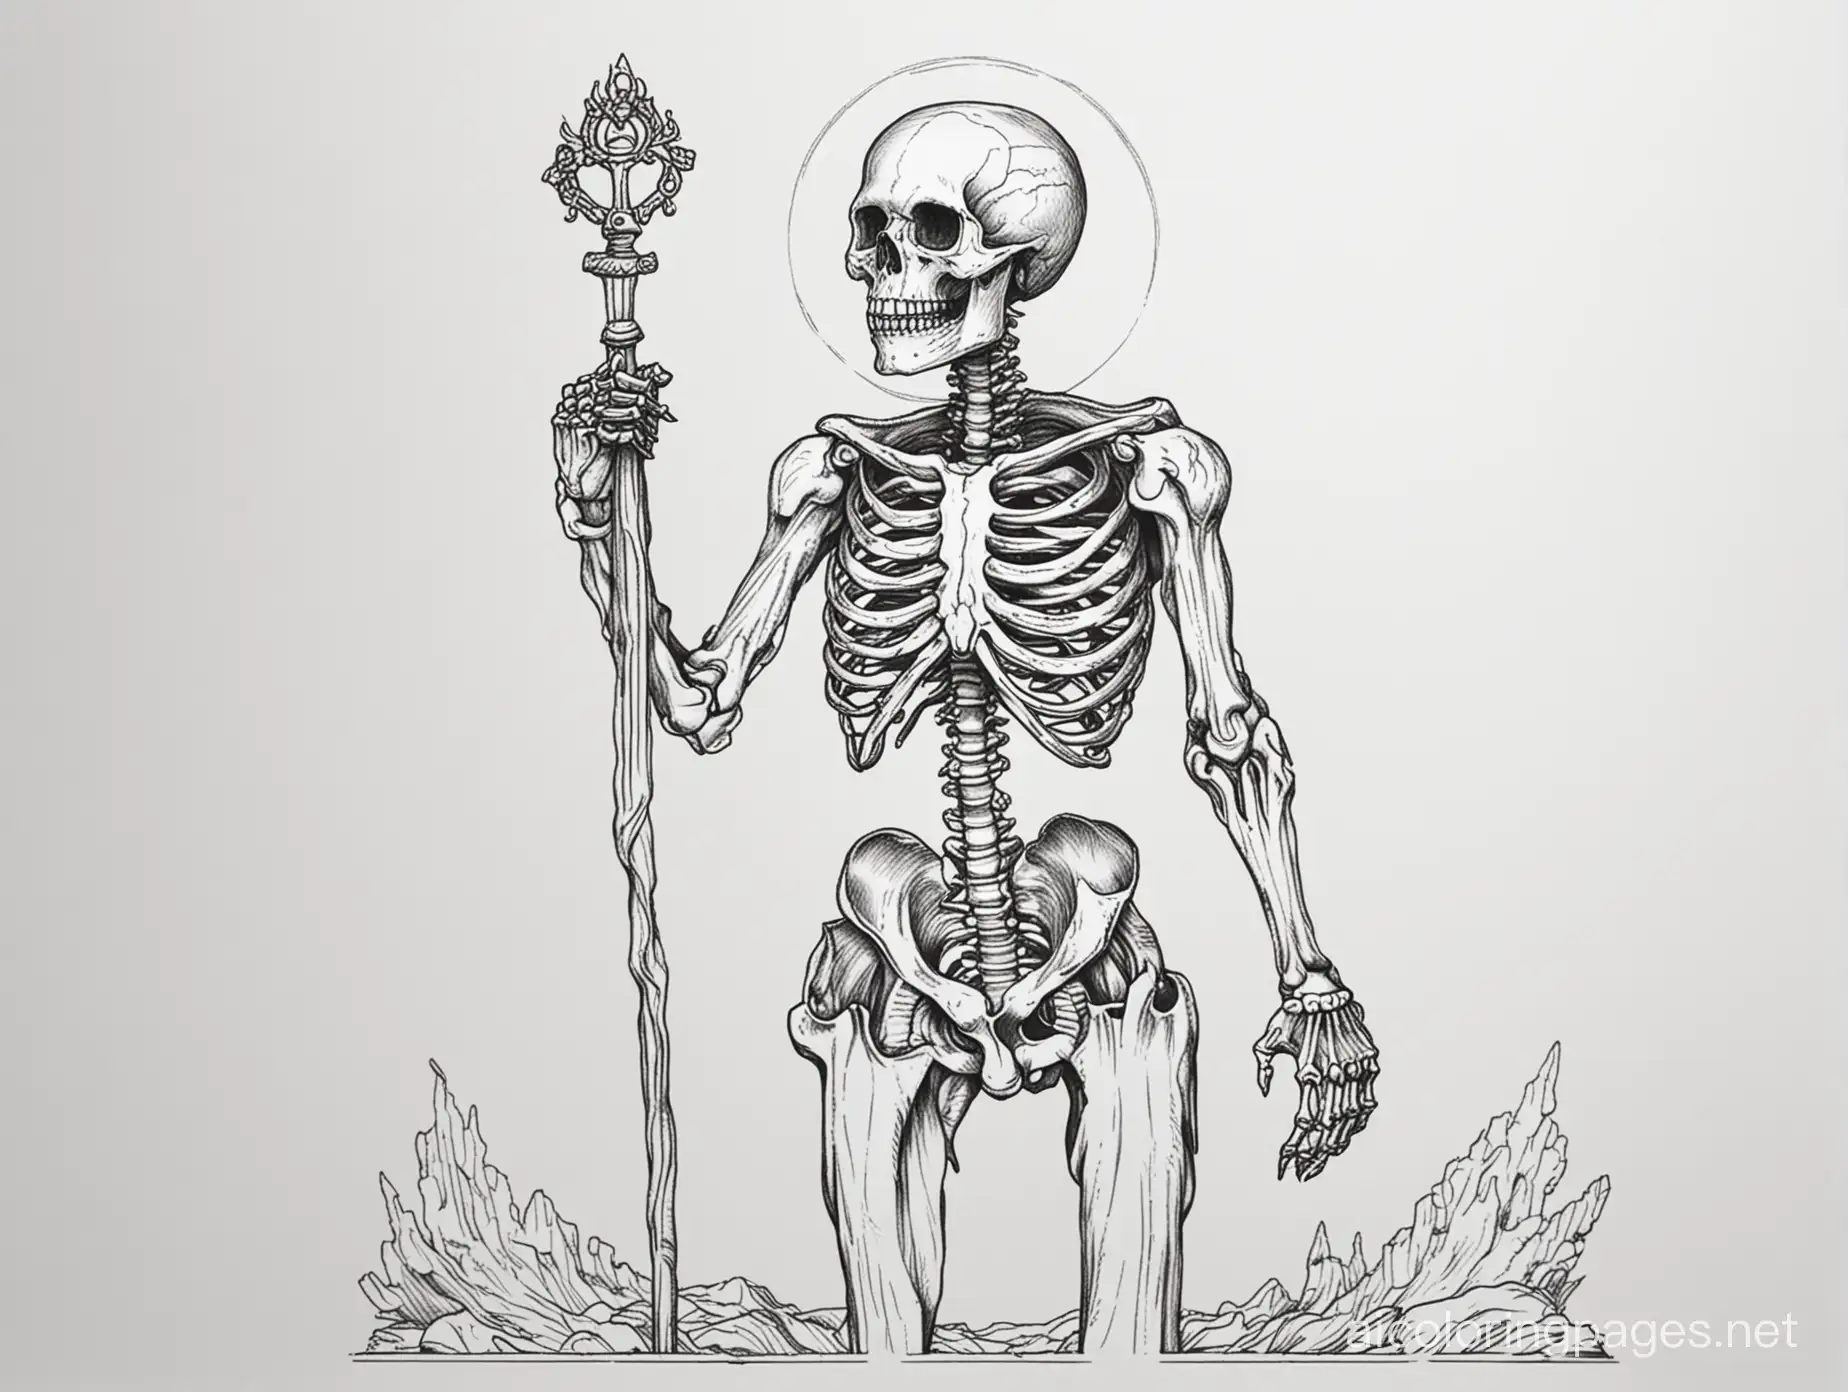 skeleton god

, Coloring Page, black and white, line art, white background, Simplicity, Ample White Space. The background of the coloring page is plain white to make it easy for young children to color within the lines. The outlines of all the subjects are easy to distinguish, making it simple for kids to color without too much difficulty